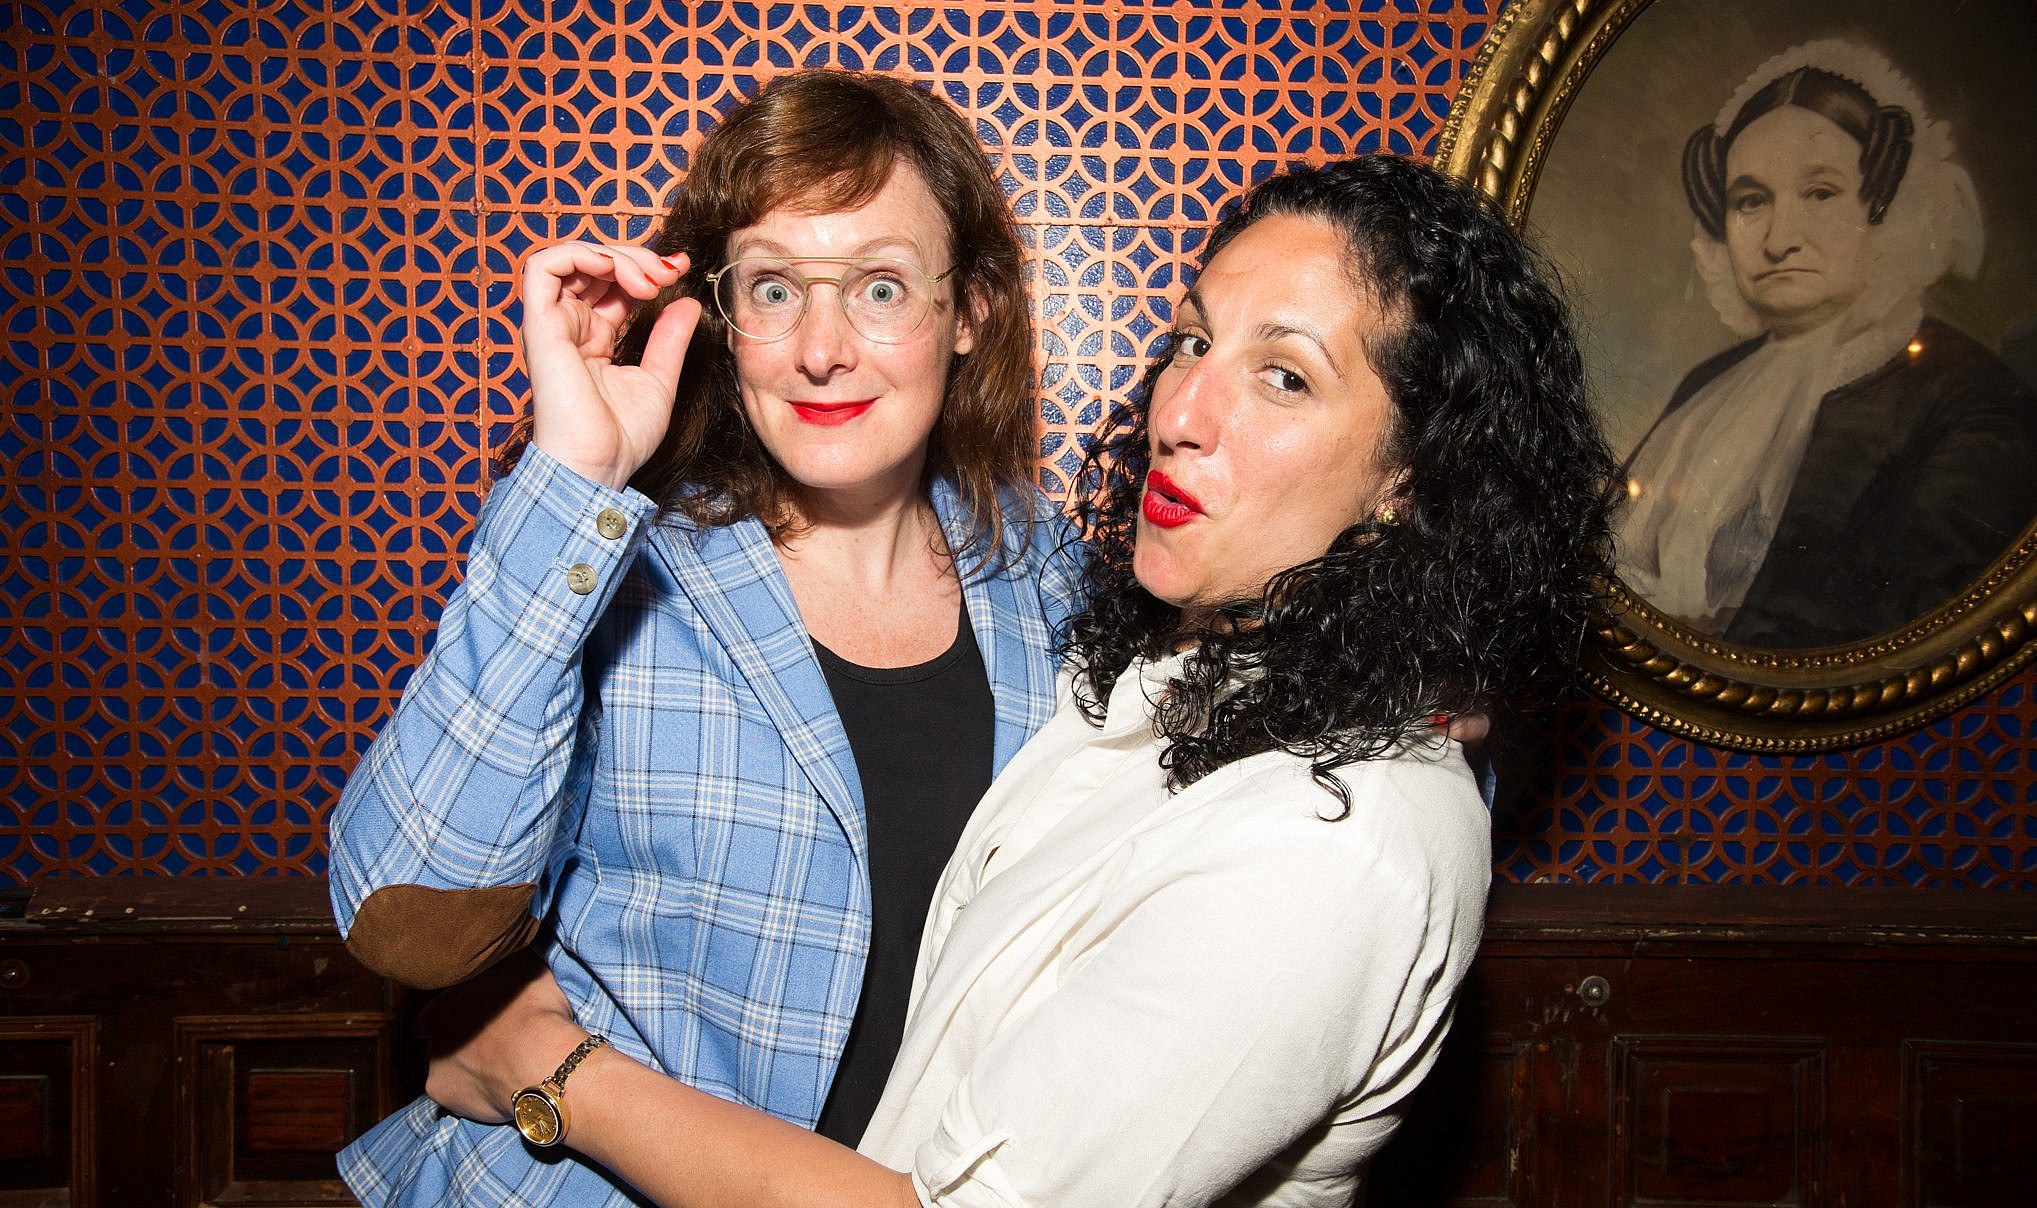 Married Lesbian Palestinian Jewish Comedians Aim To Get Laughs Make History The Times Of Israel